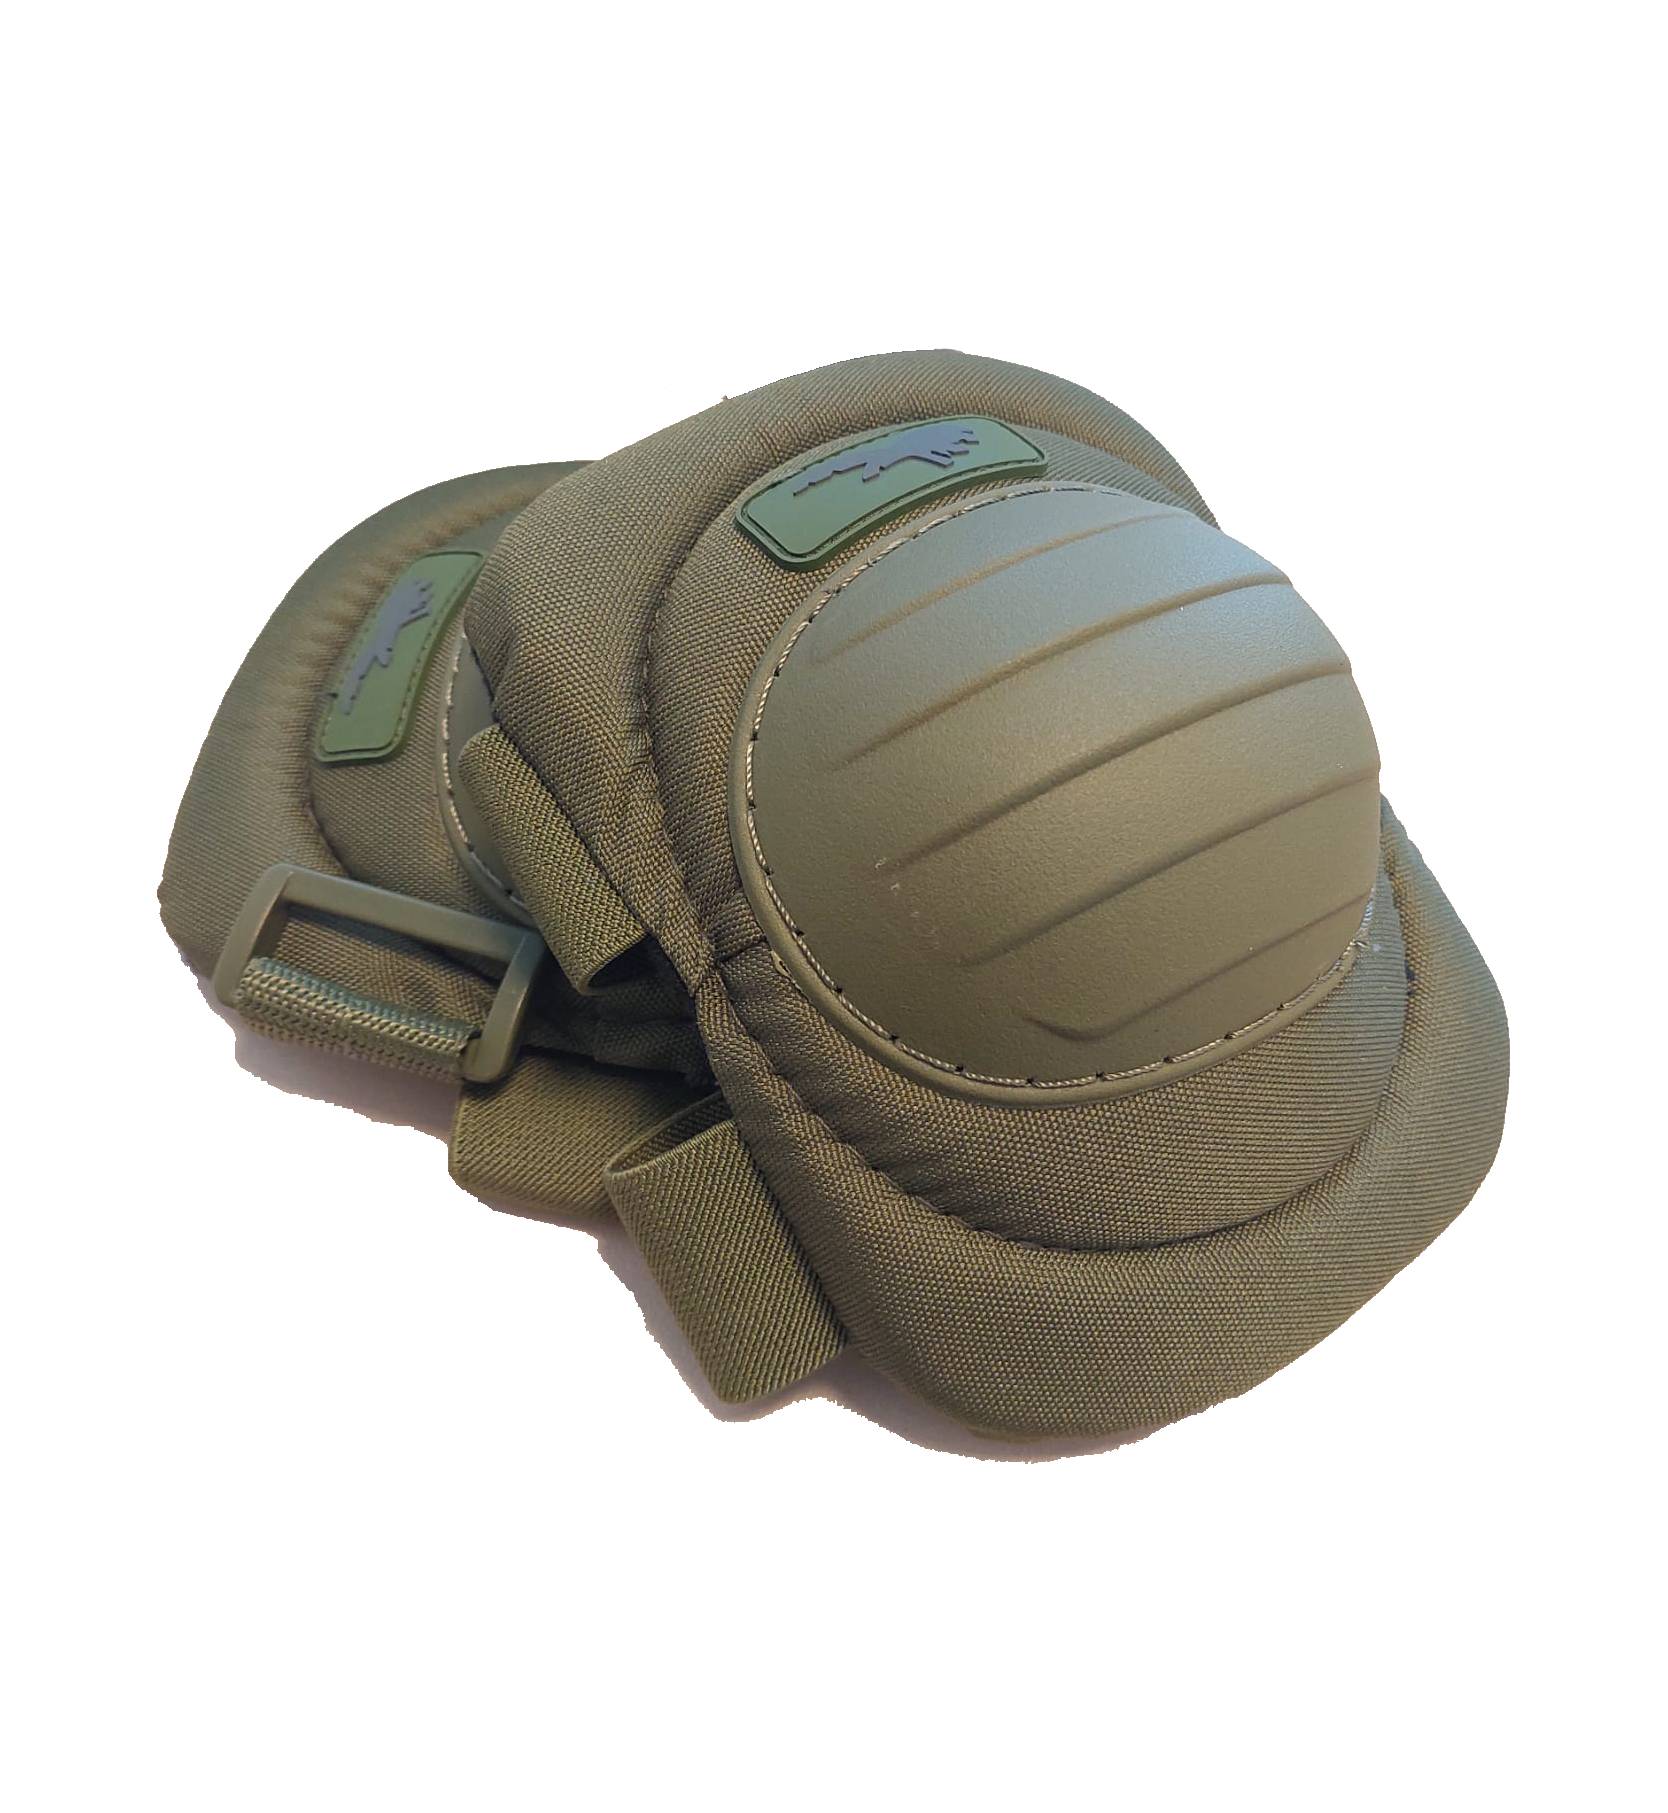 Tactical Elbow Pads